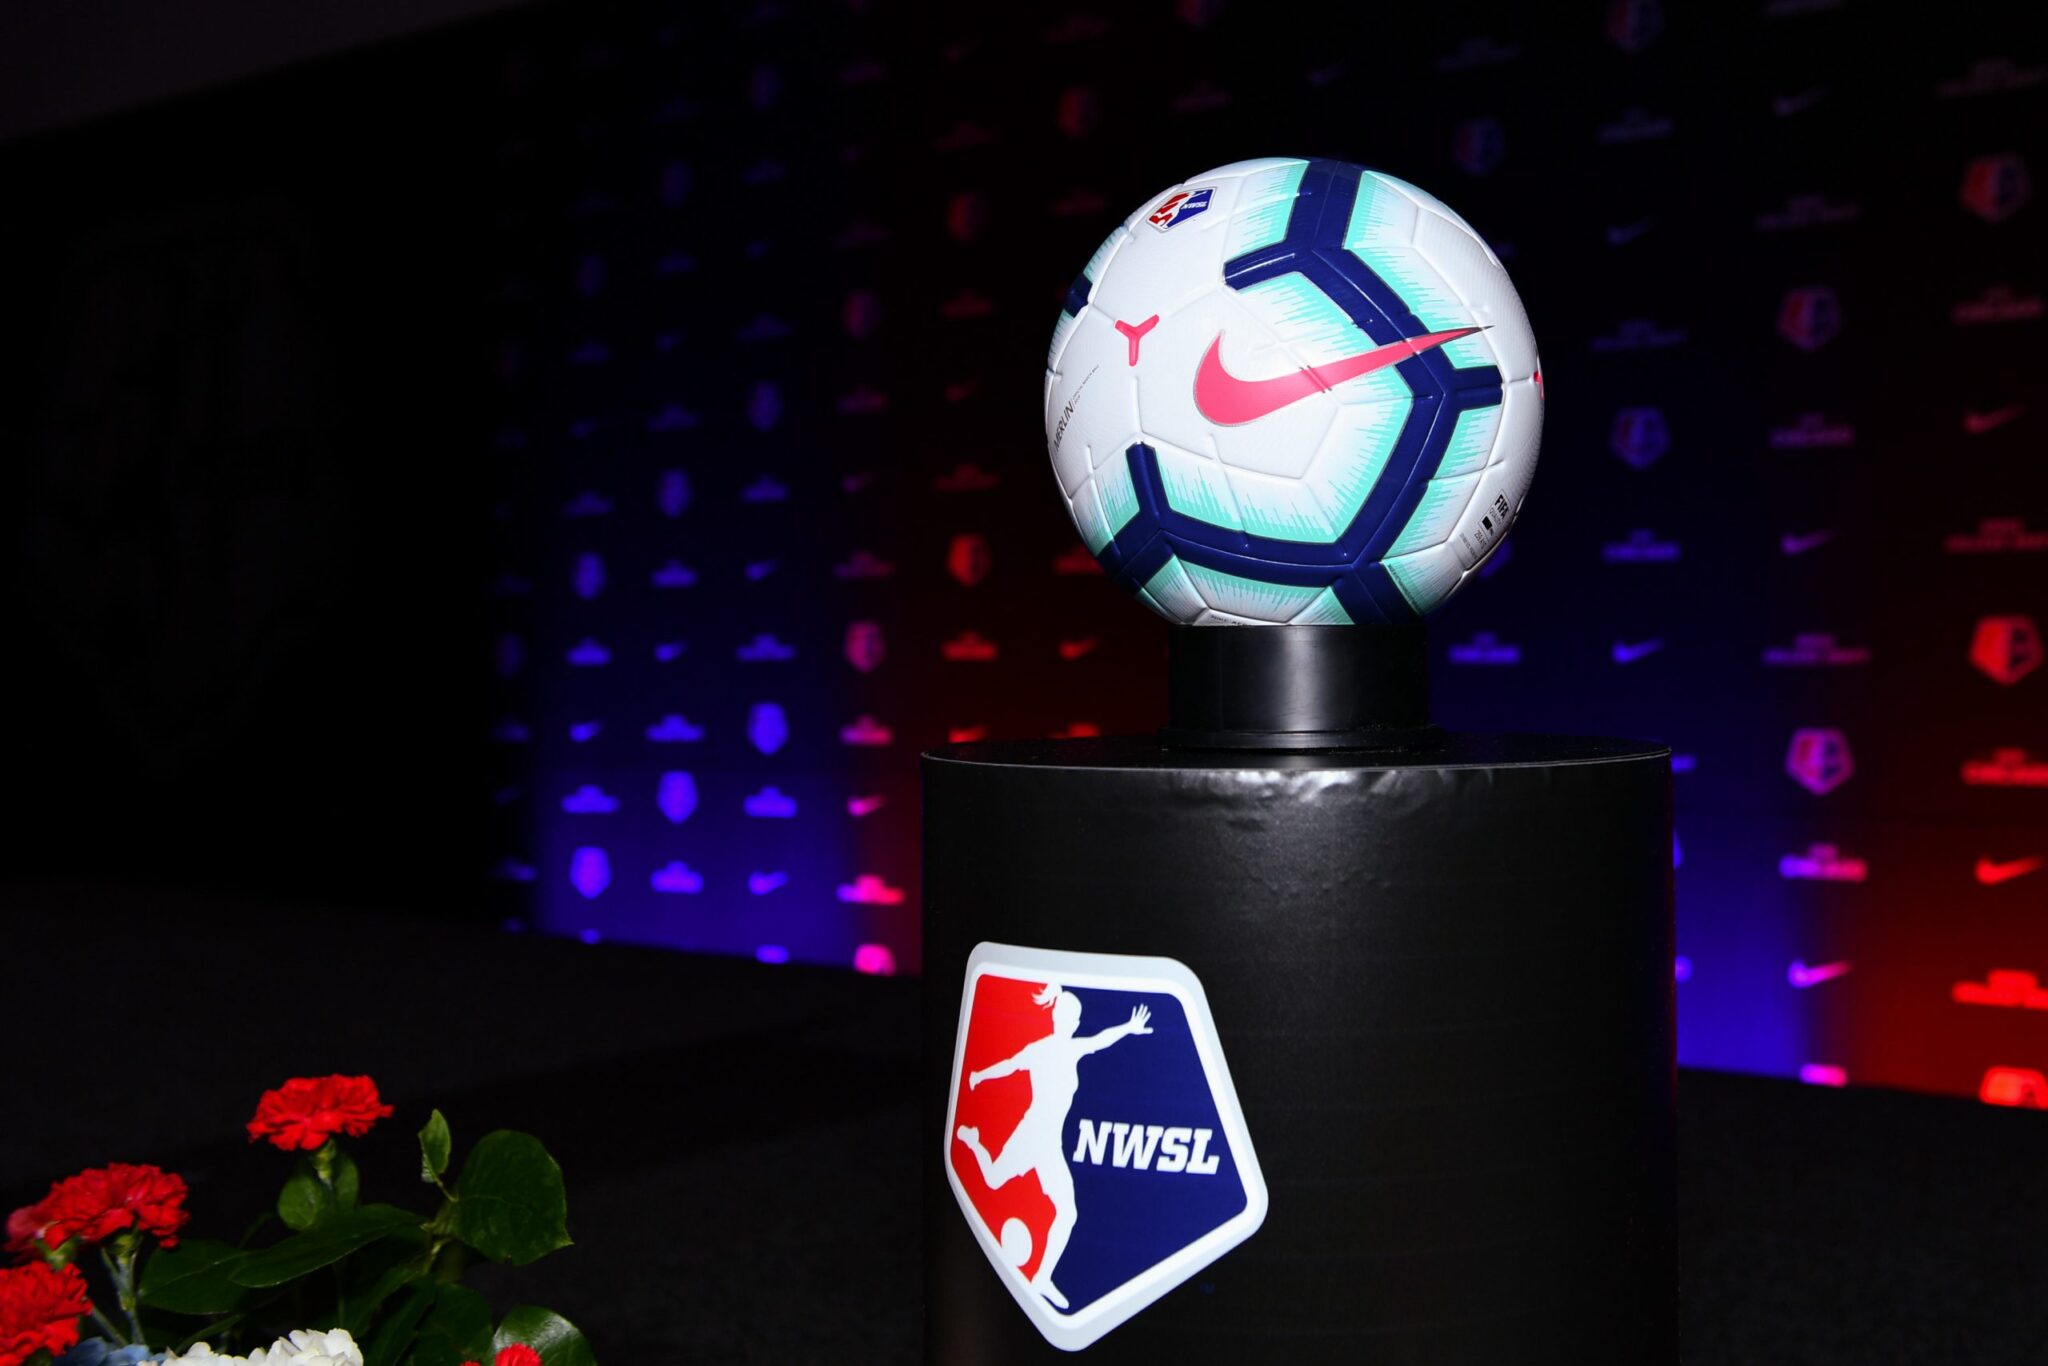 NWSL Opens Player Registration and Announces Current Selection Order For The Renamed 2021 NWSL Draft Featured Image